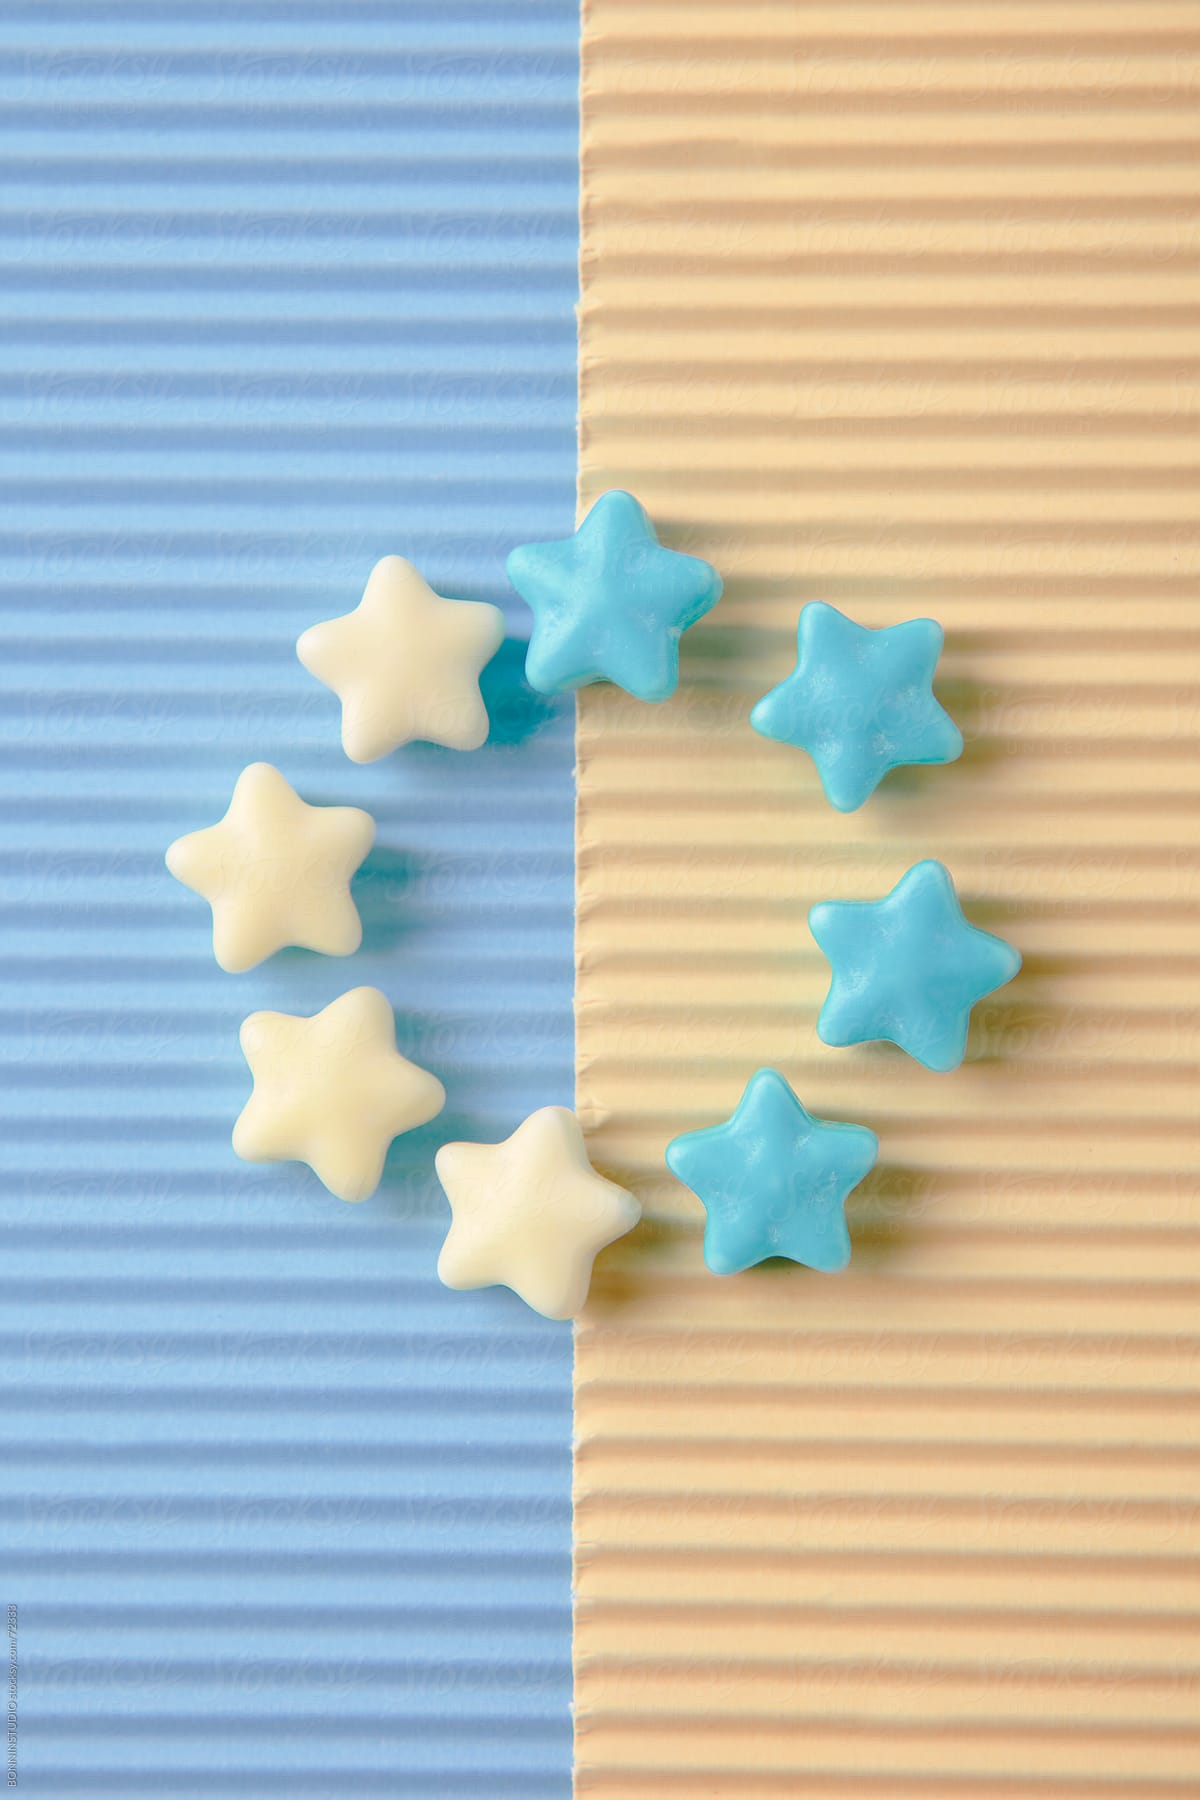 Composition with sugar candy stars. Pastel tones.